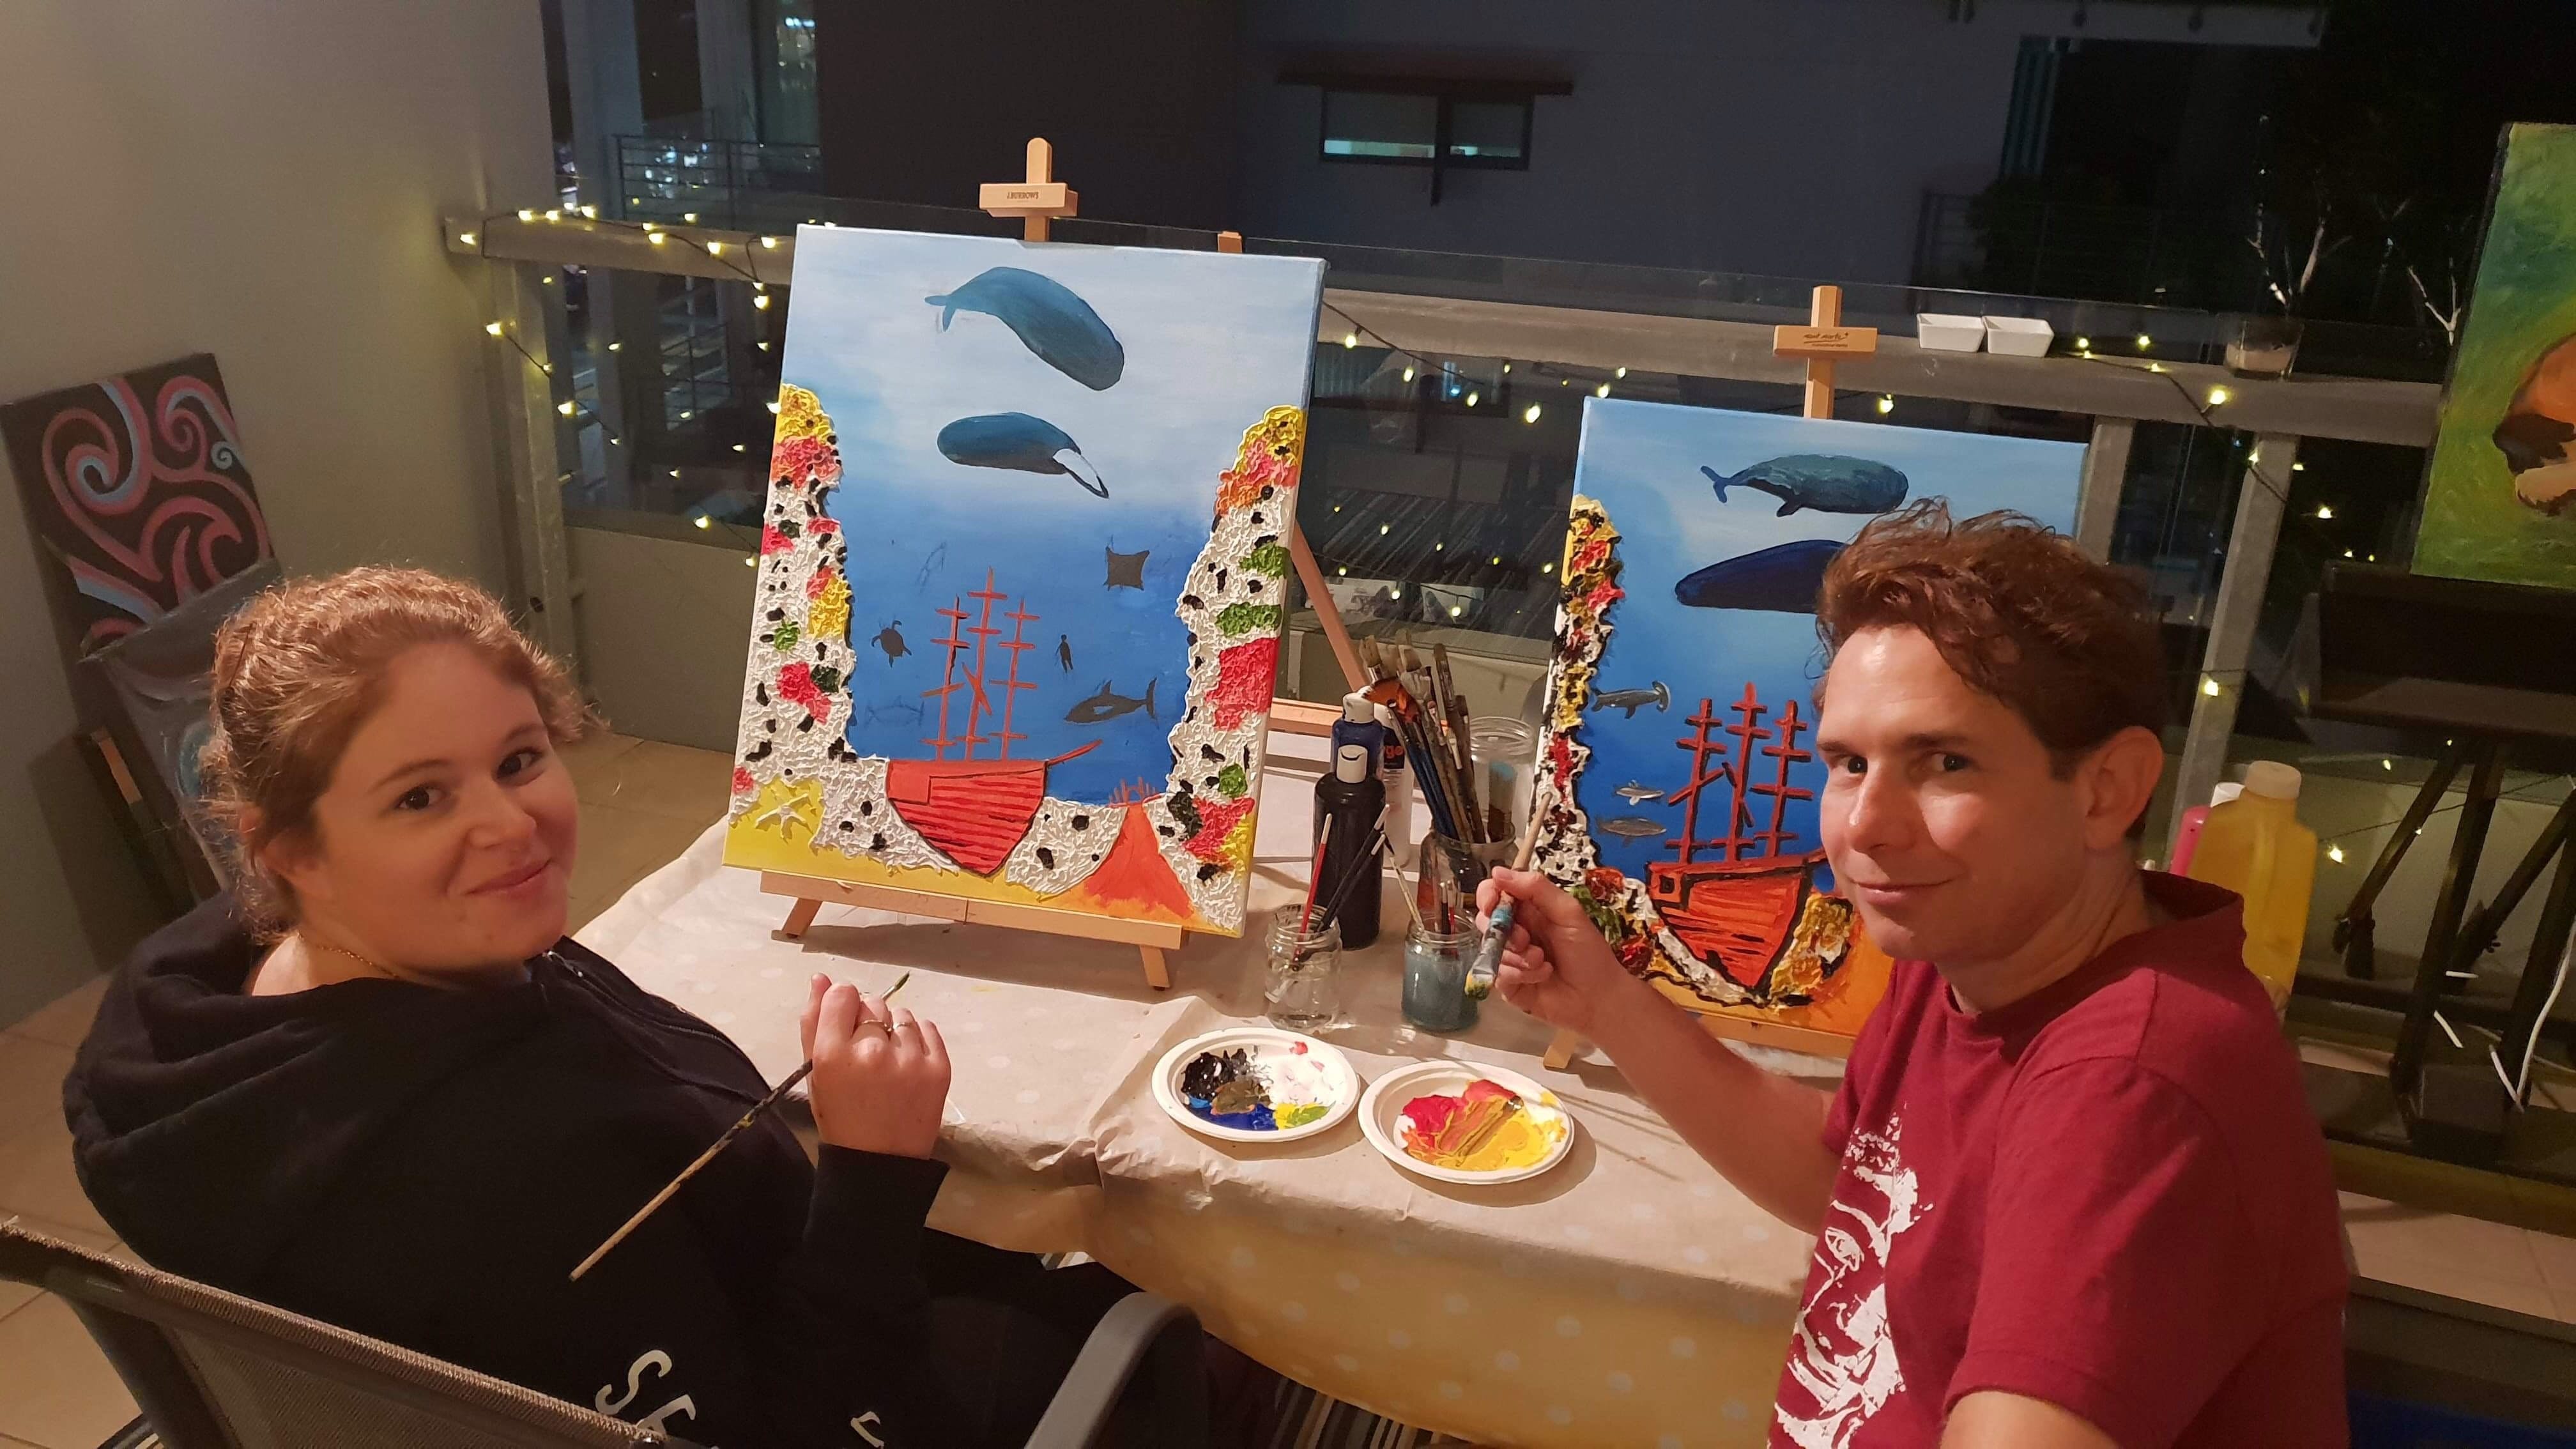 Paint and Sip Social Art Classes 2 for 1 - Townsville Tourism